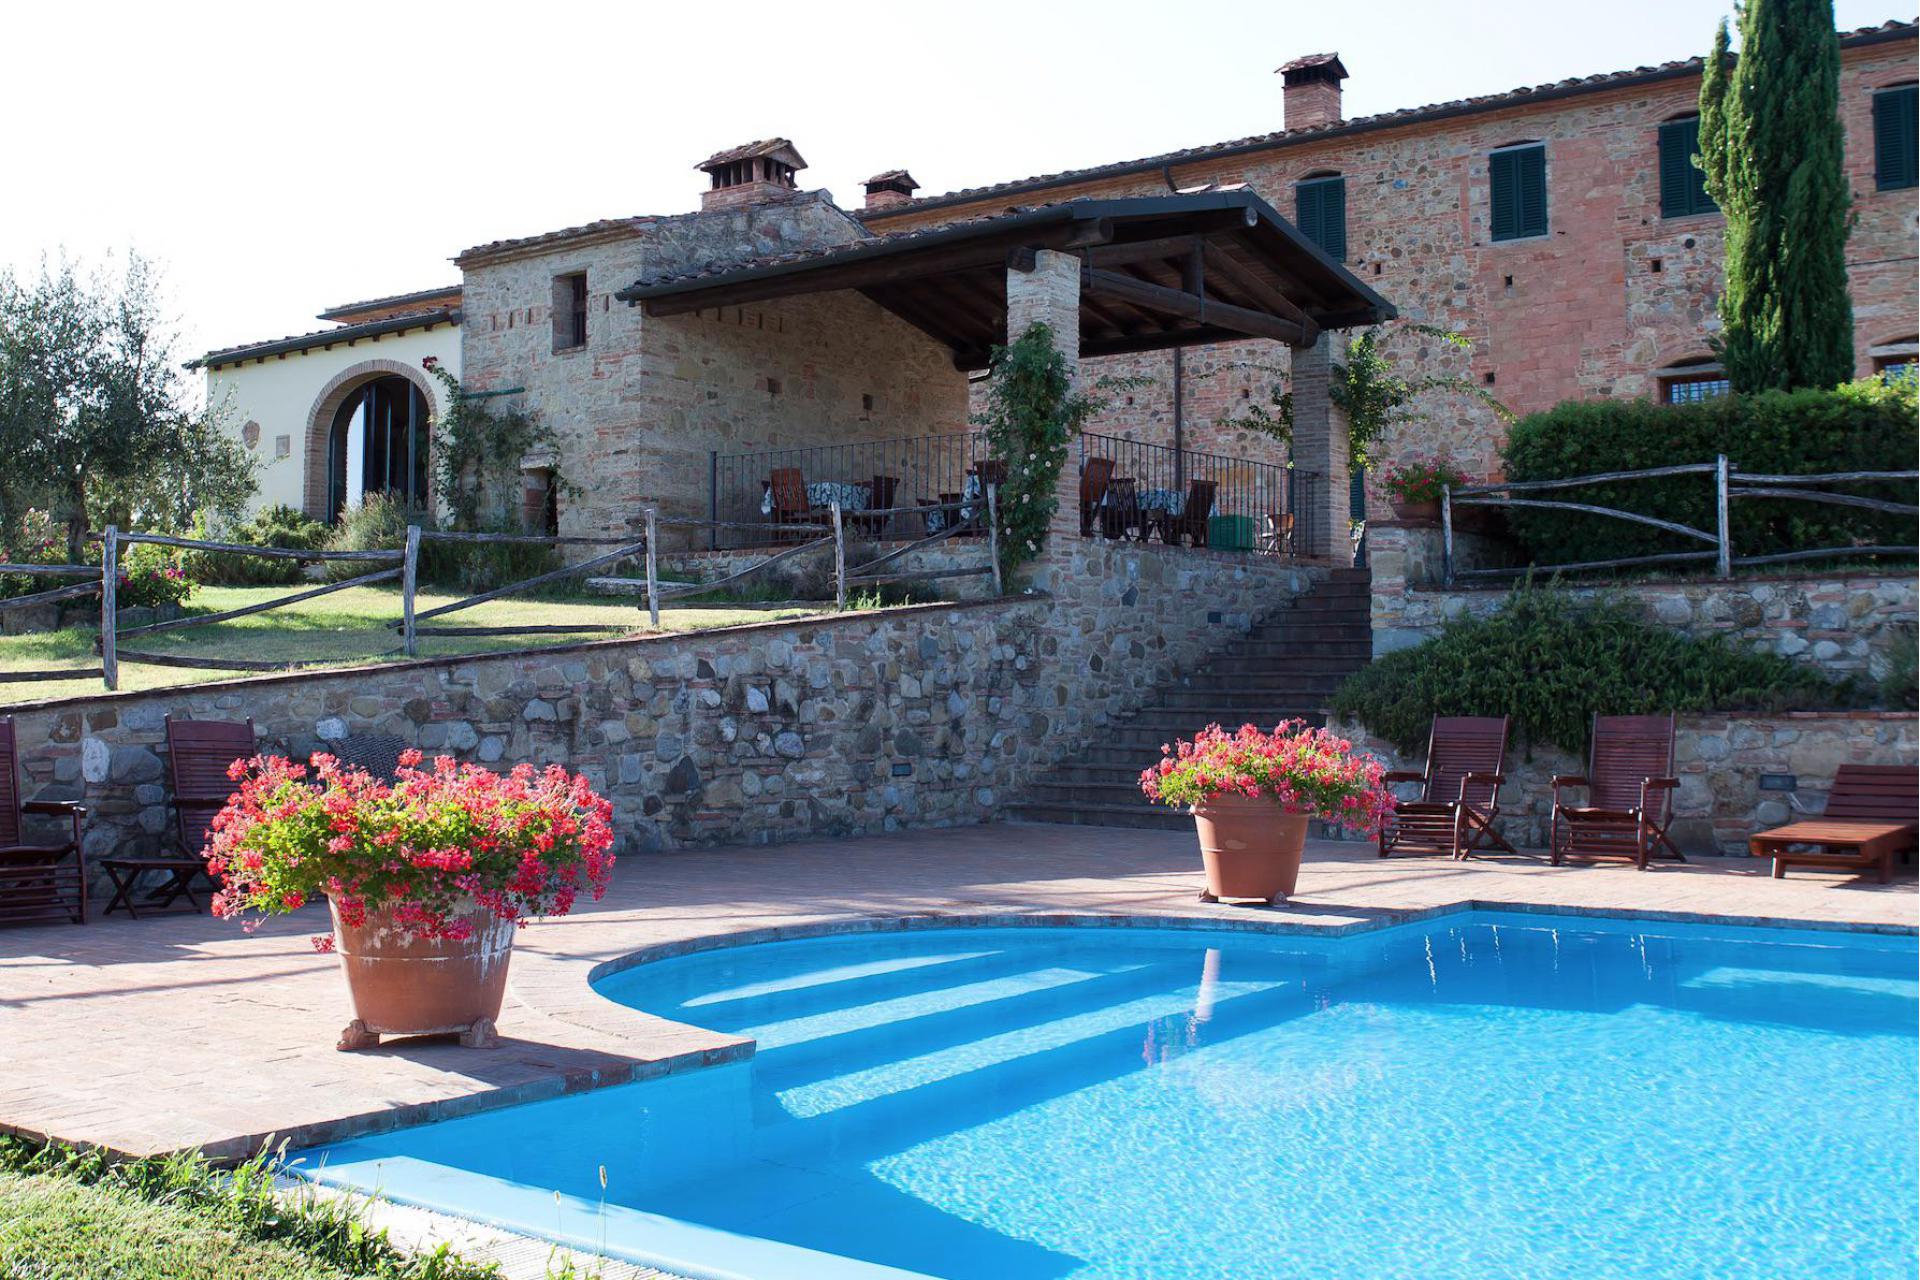 Agriturismo Tuscany Child-friendly agriturismo in Tuscany with pizza night